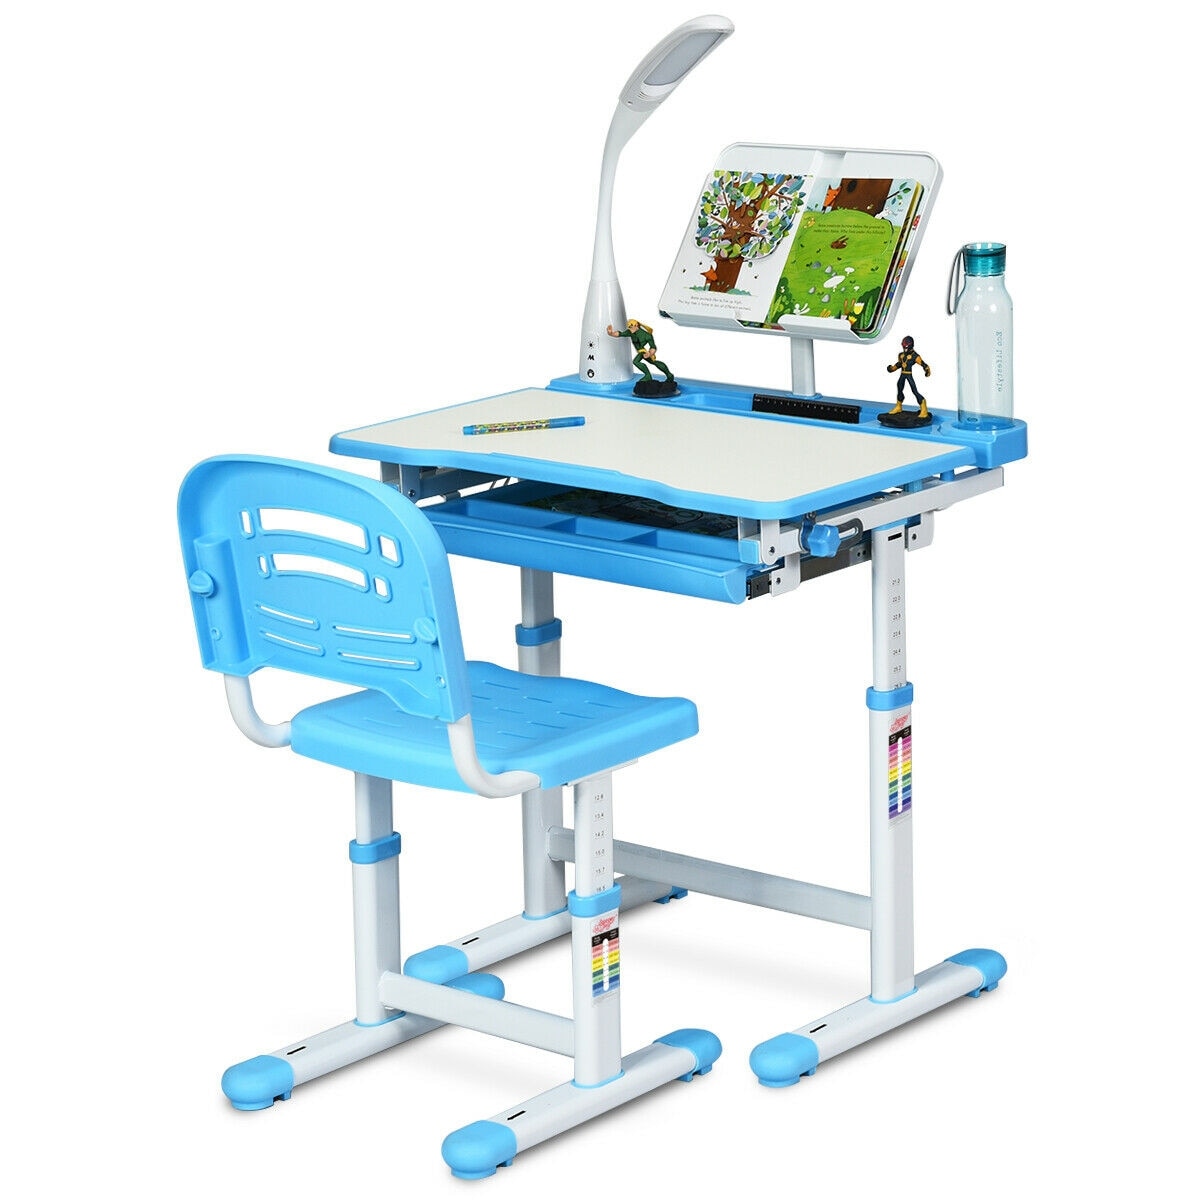 https://ak1.ostkcdn.com/images/products/is/images/direct/7a97cfc3ed2e341b3636c0f36e815ac4ffd67e6c/Gymax-Height-Adjustable-Kids-Desk-Chair-Set-Study-Drawing-w-Lamp-%26-Bookstand-Blue.jpg